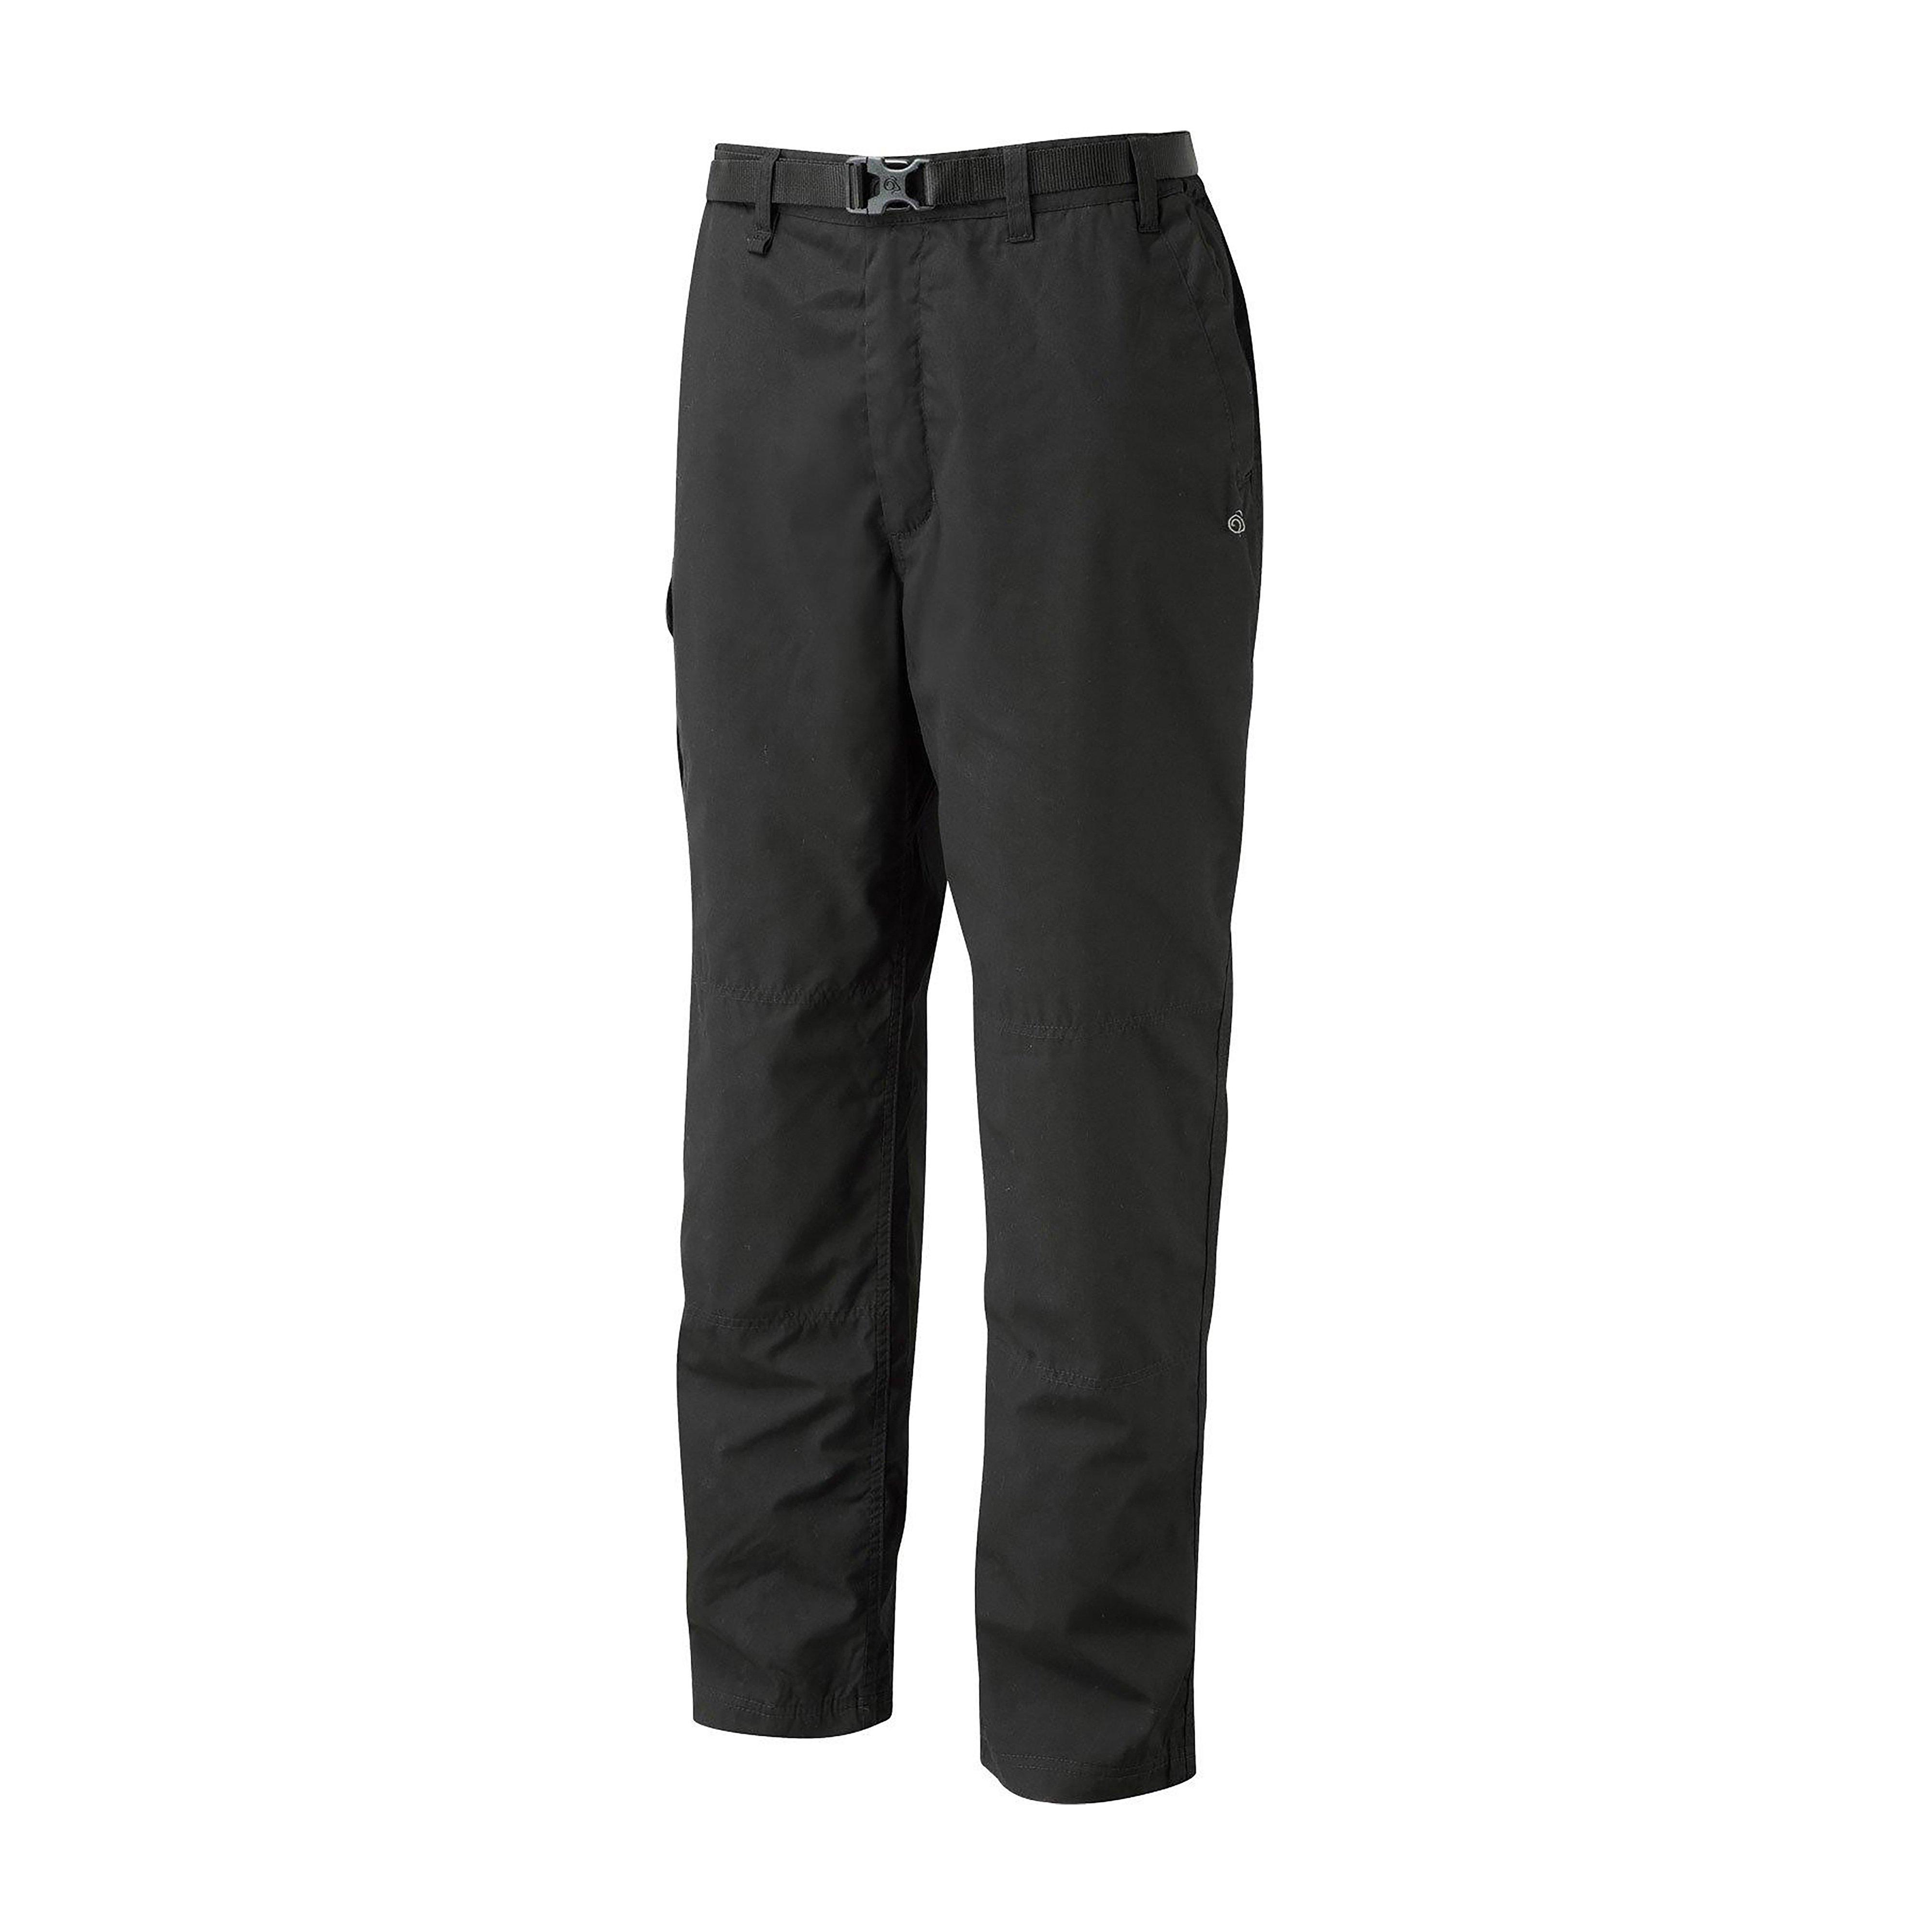 Craghoppers Men's Kiwi Winter Lined Trousers Review